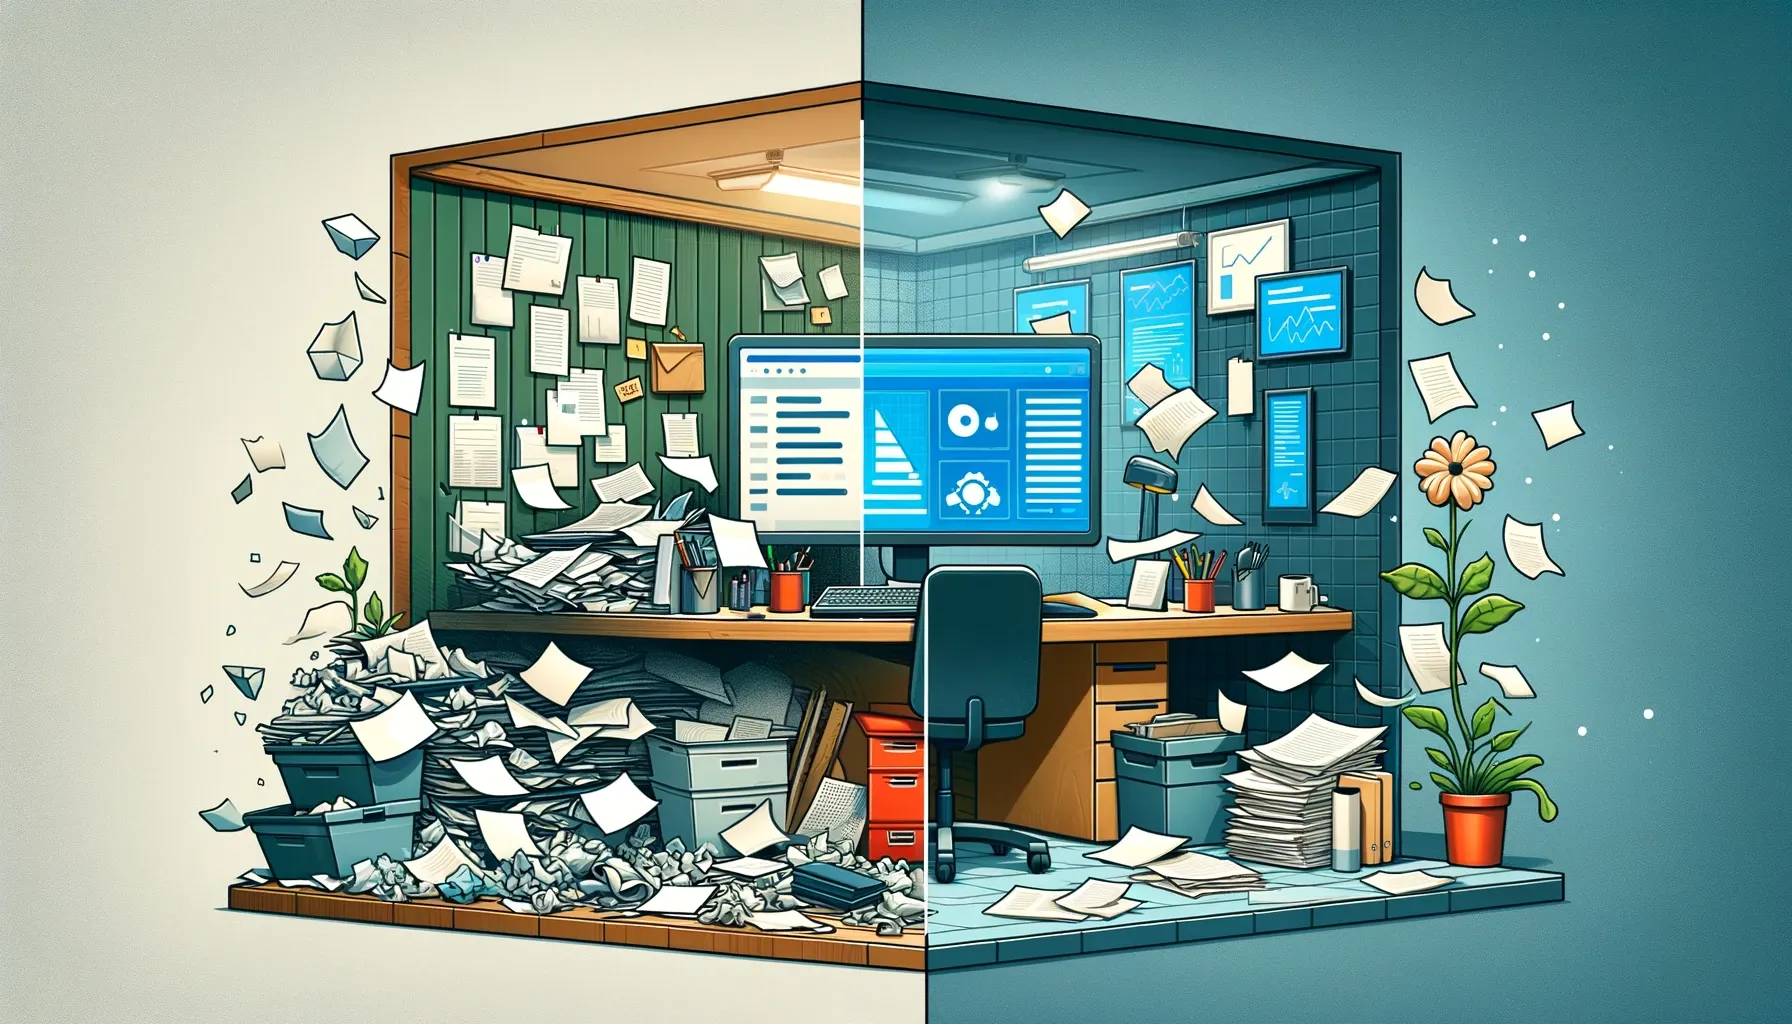 Artistic depiction of an office split in two contrasting styles, one cluttered and overwhelmed with paperwork, the other clean and digital.